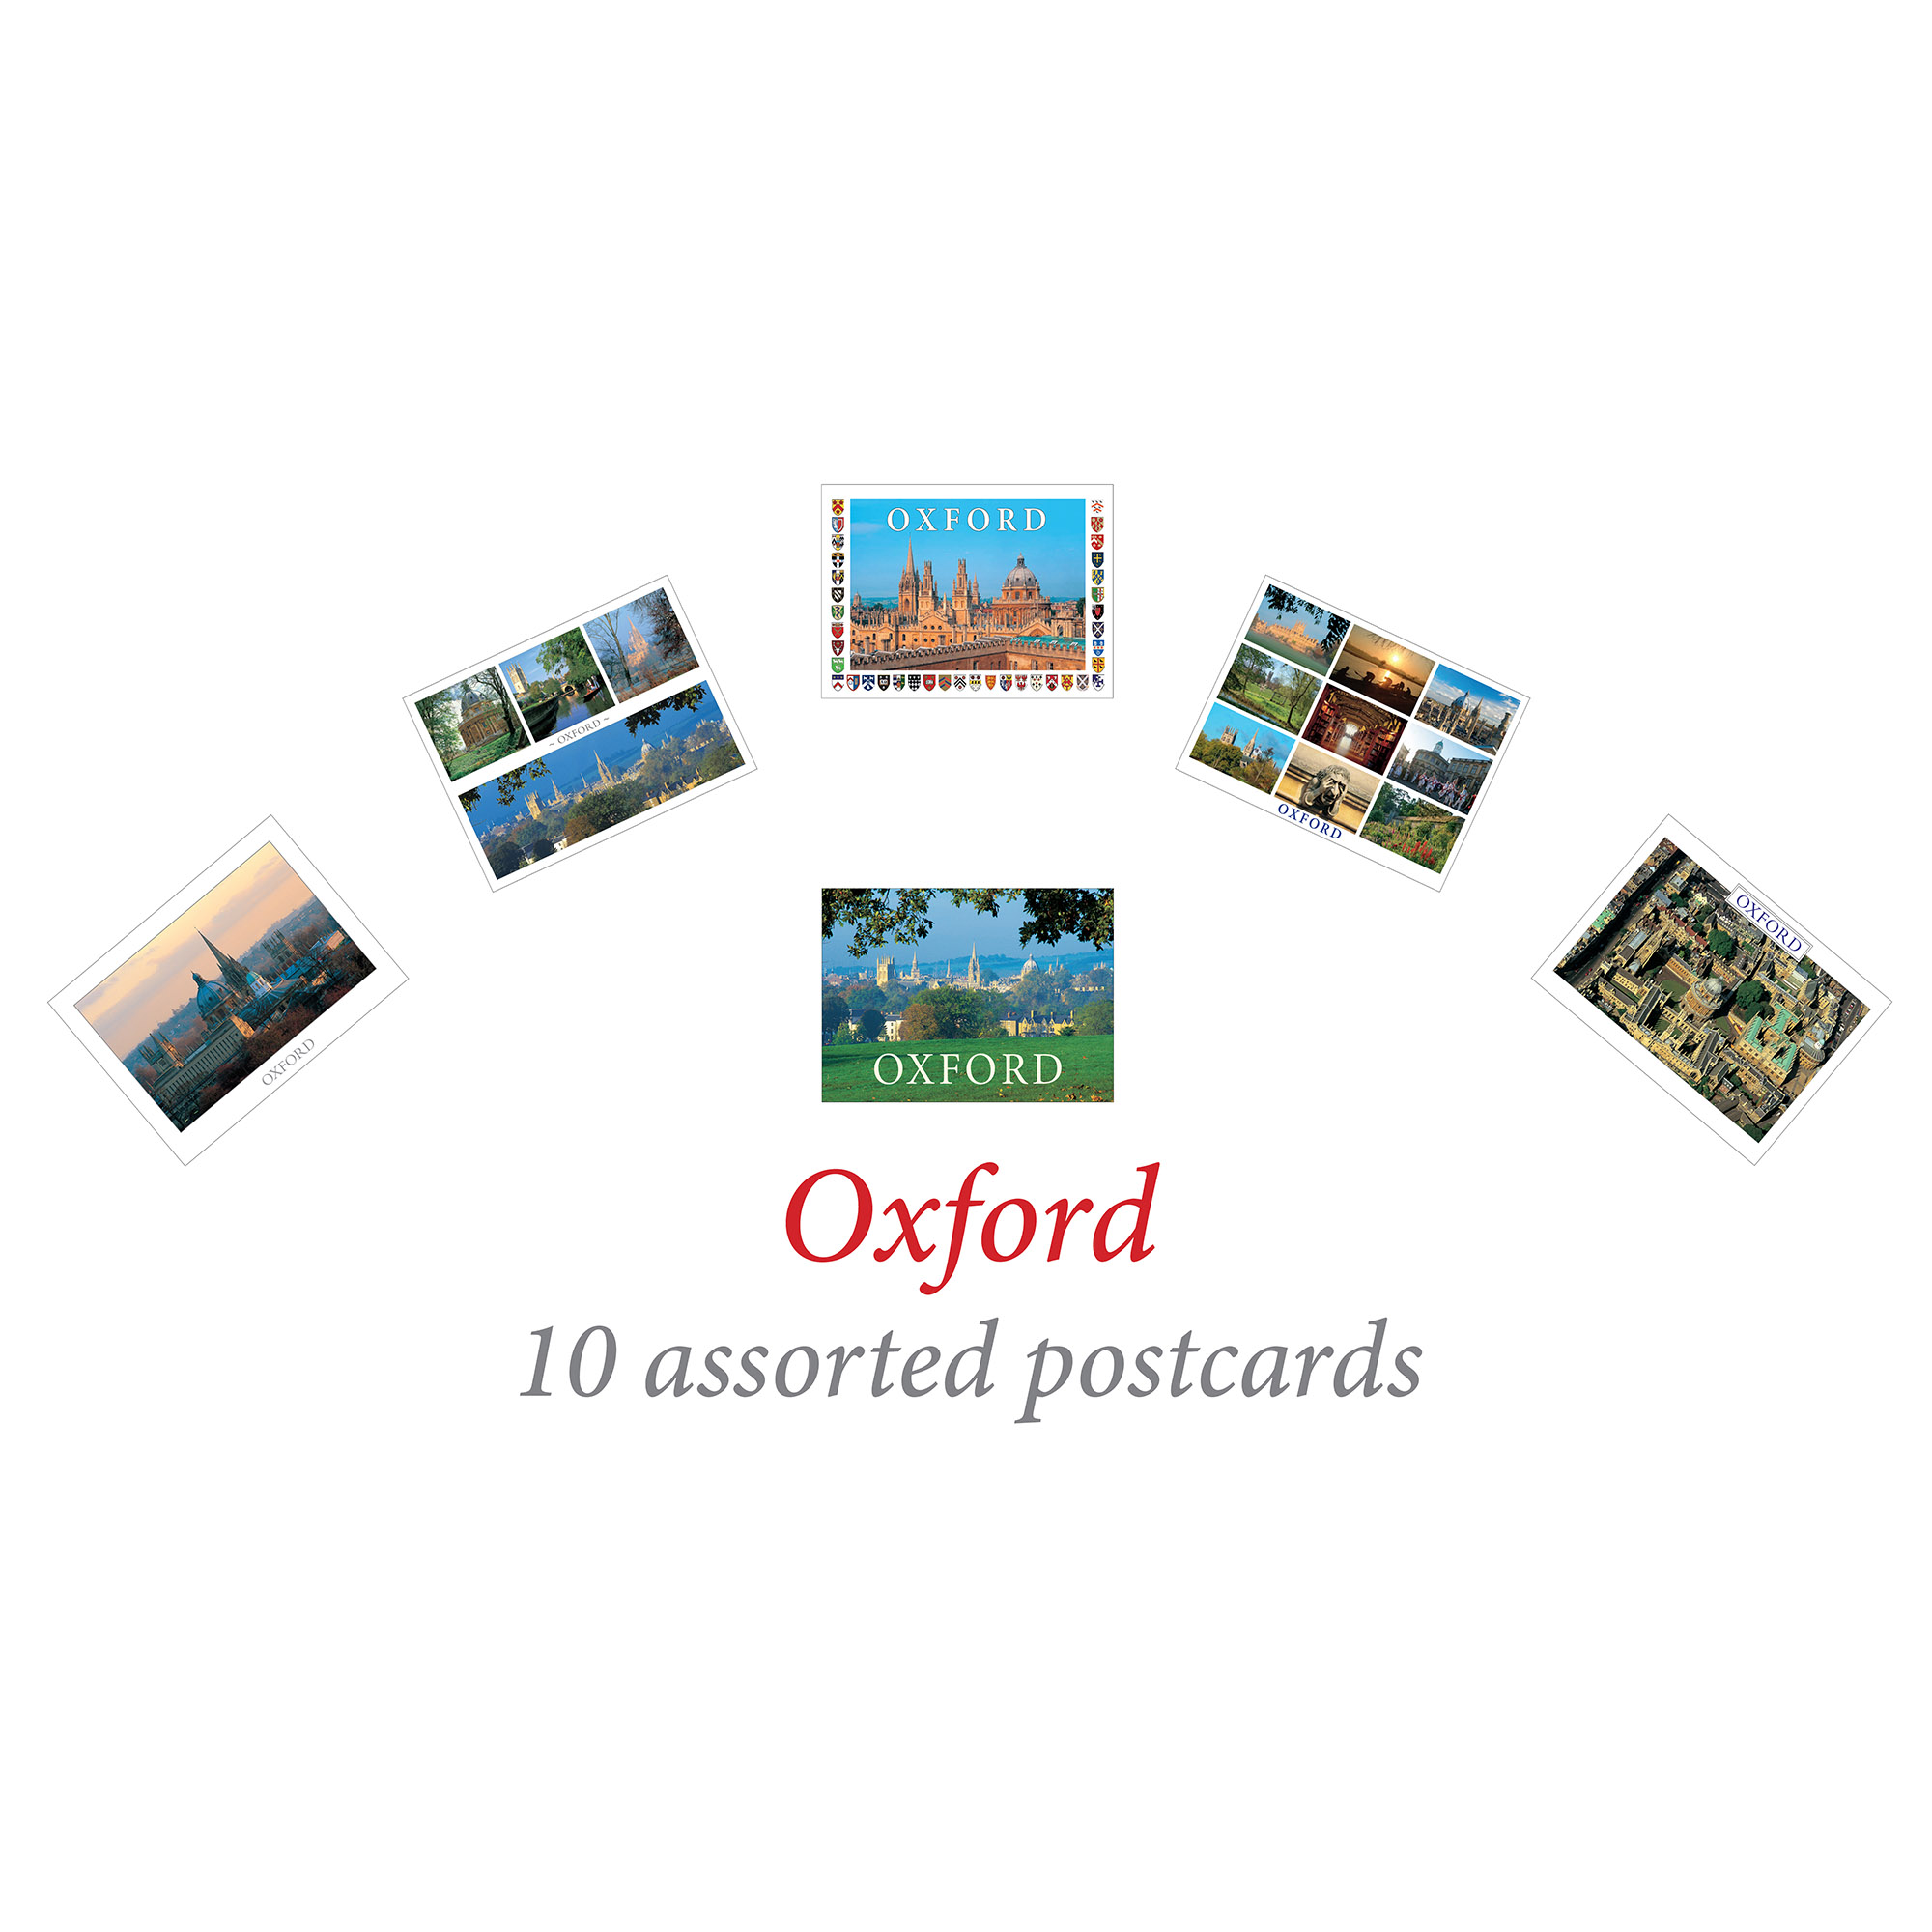 10 assorted Oxford postcards